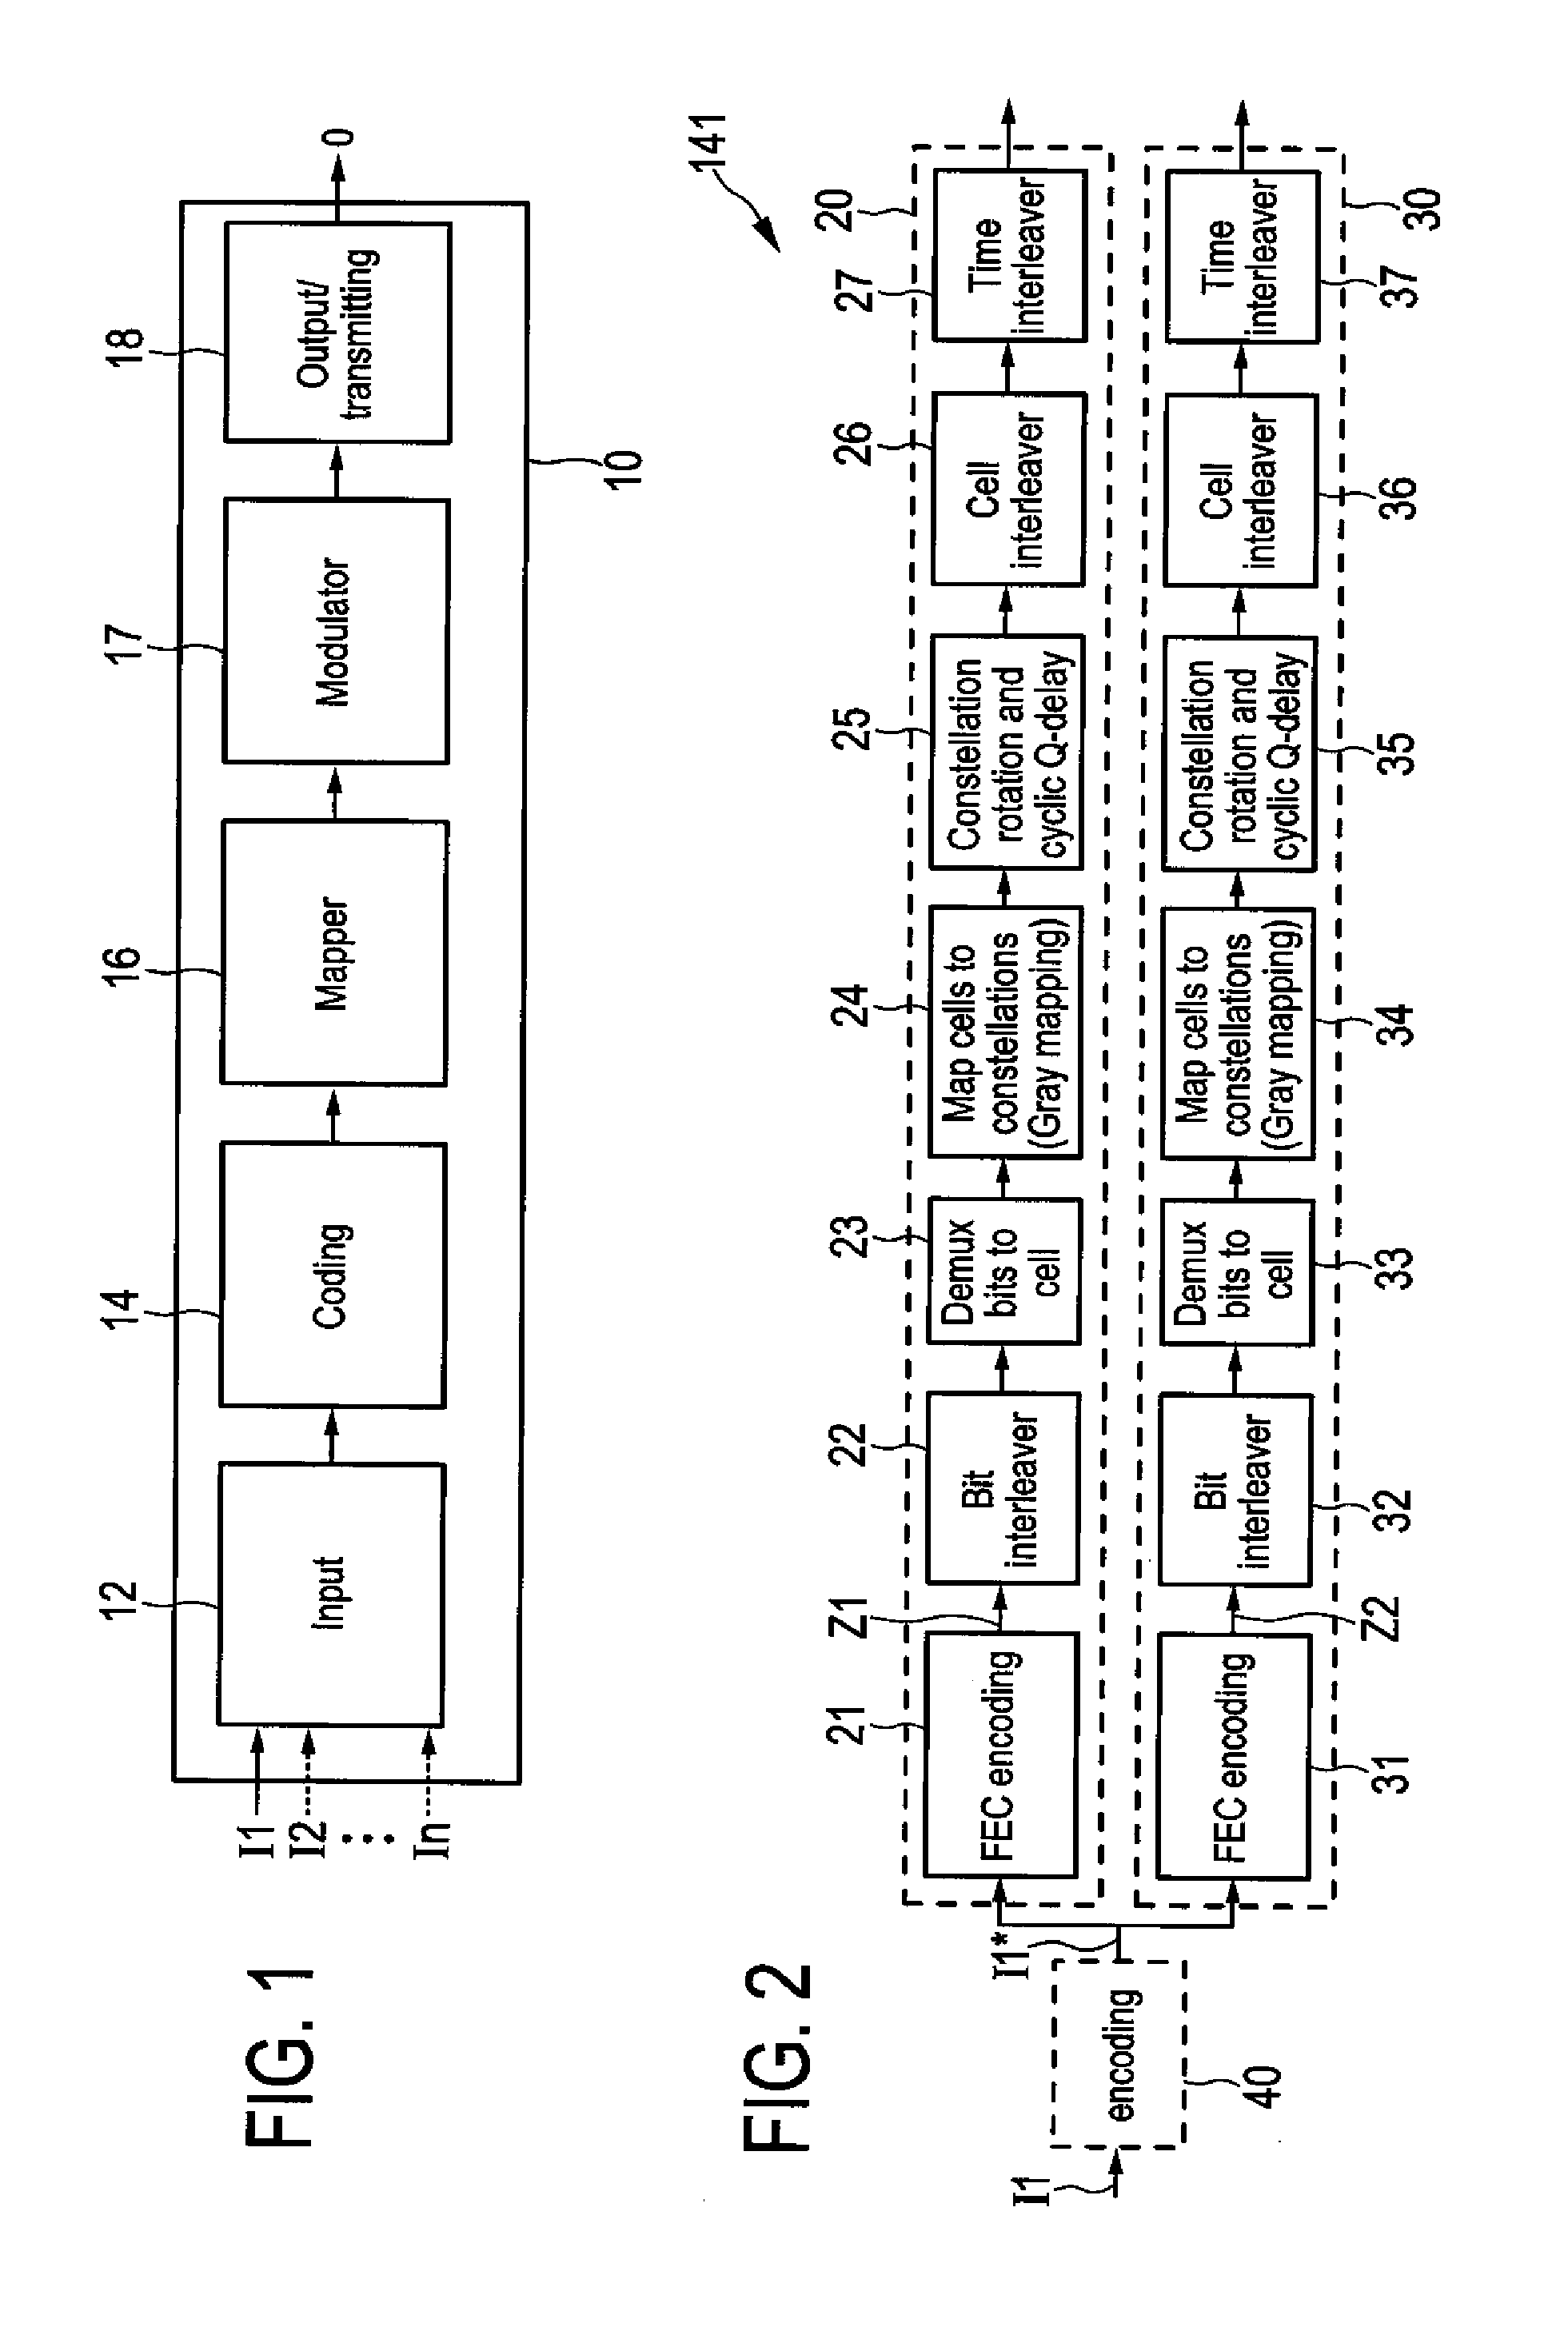 Transmitter and receiver for broadcasting data and providing incremental redundancy